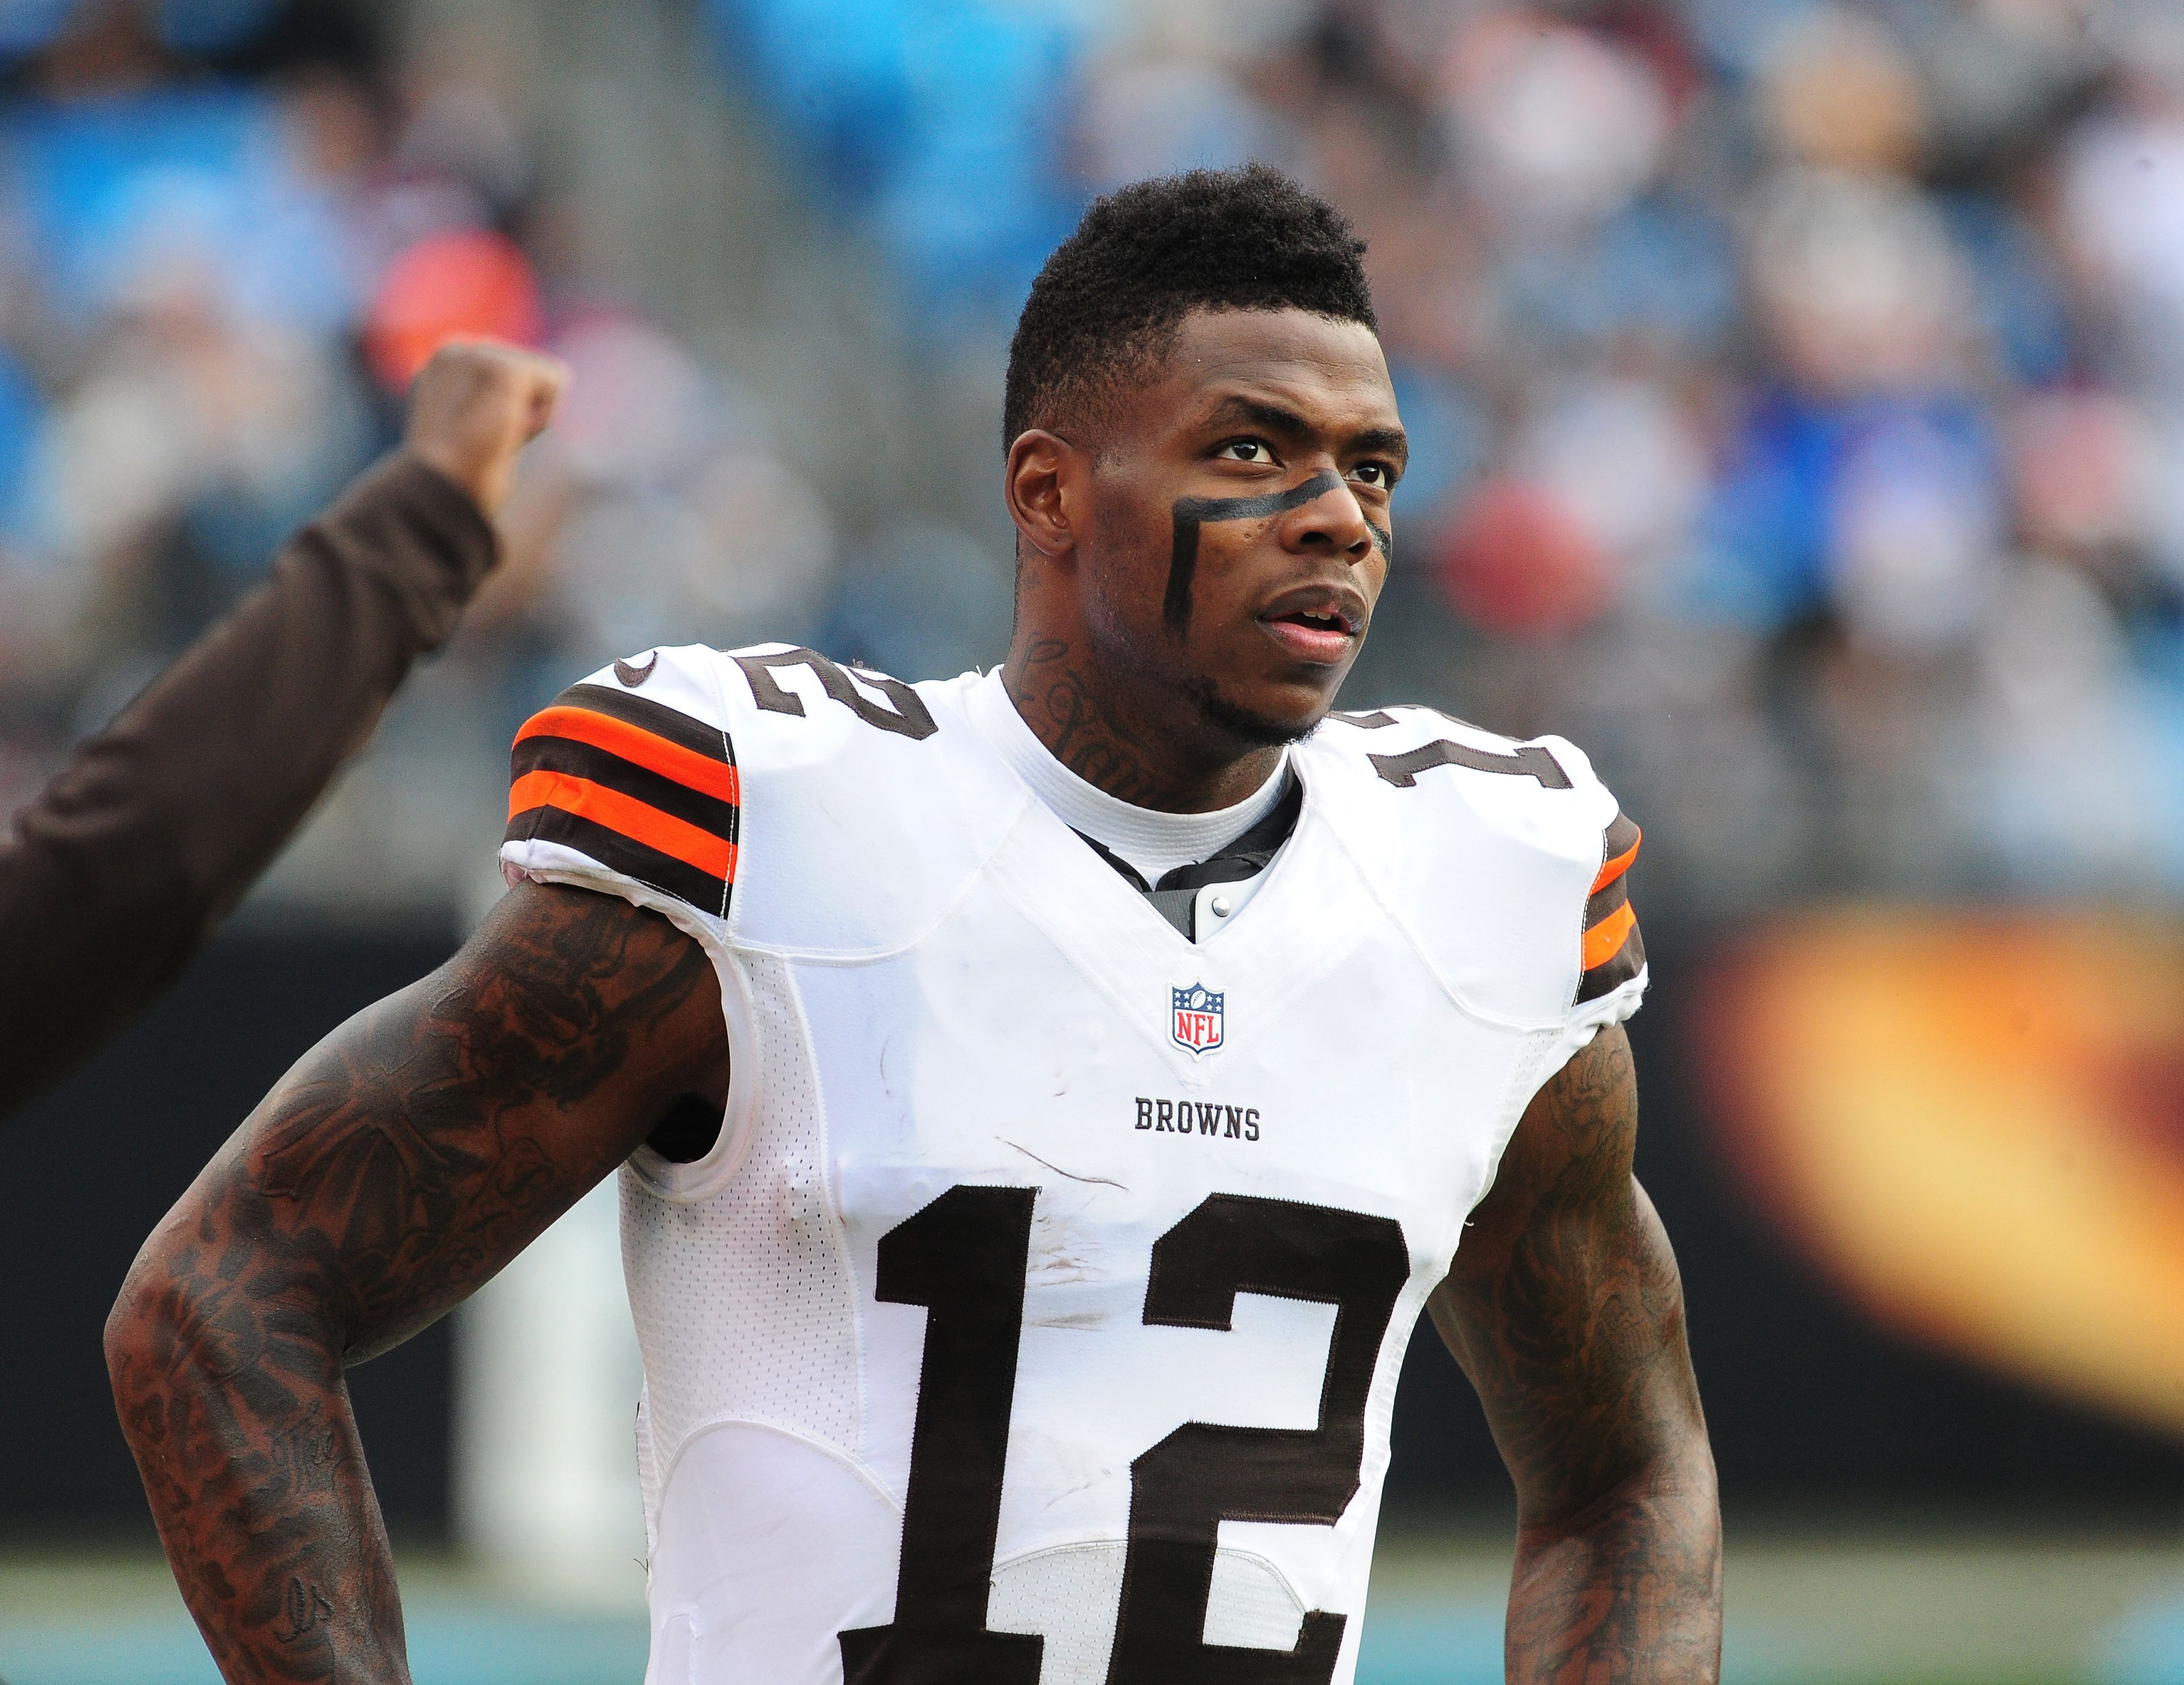 The Kansas City Chiefs would be a perfect home for Josh Gordon